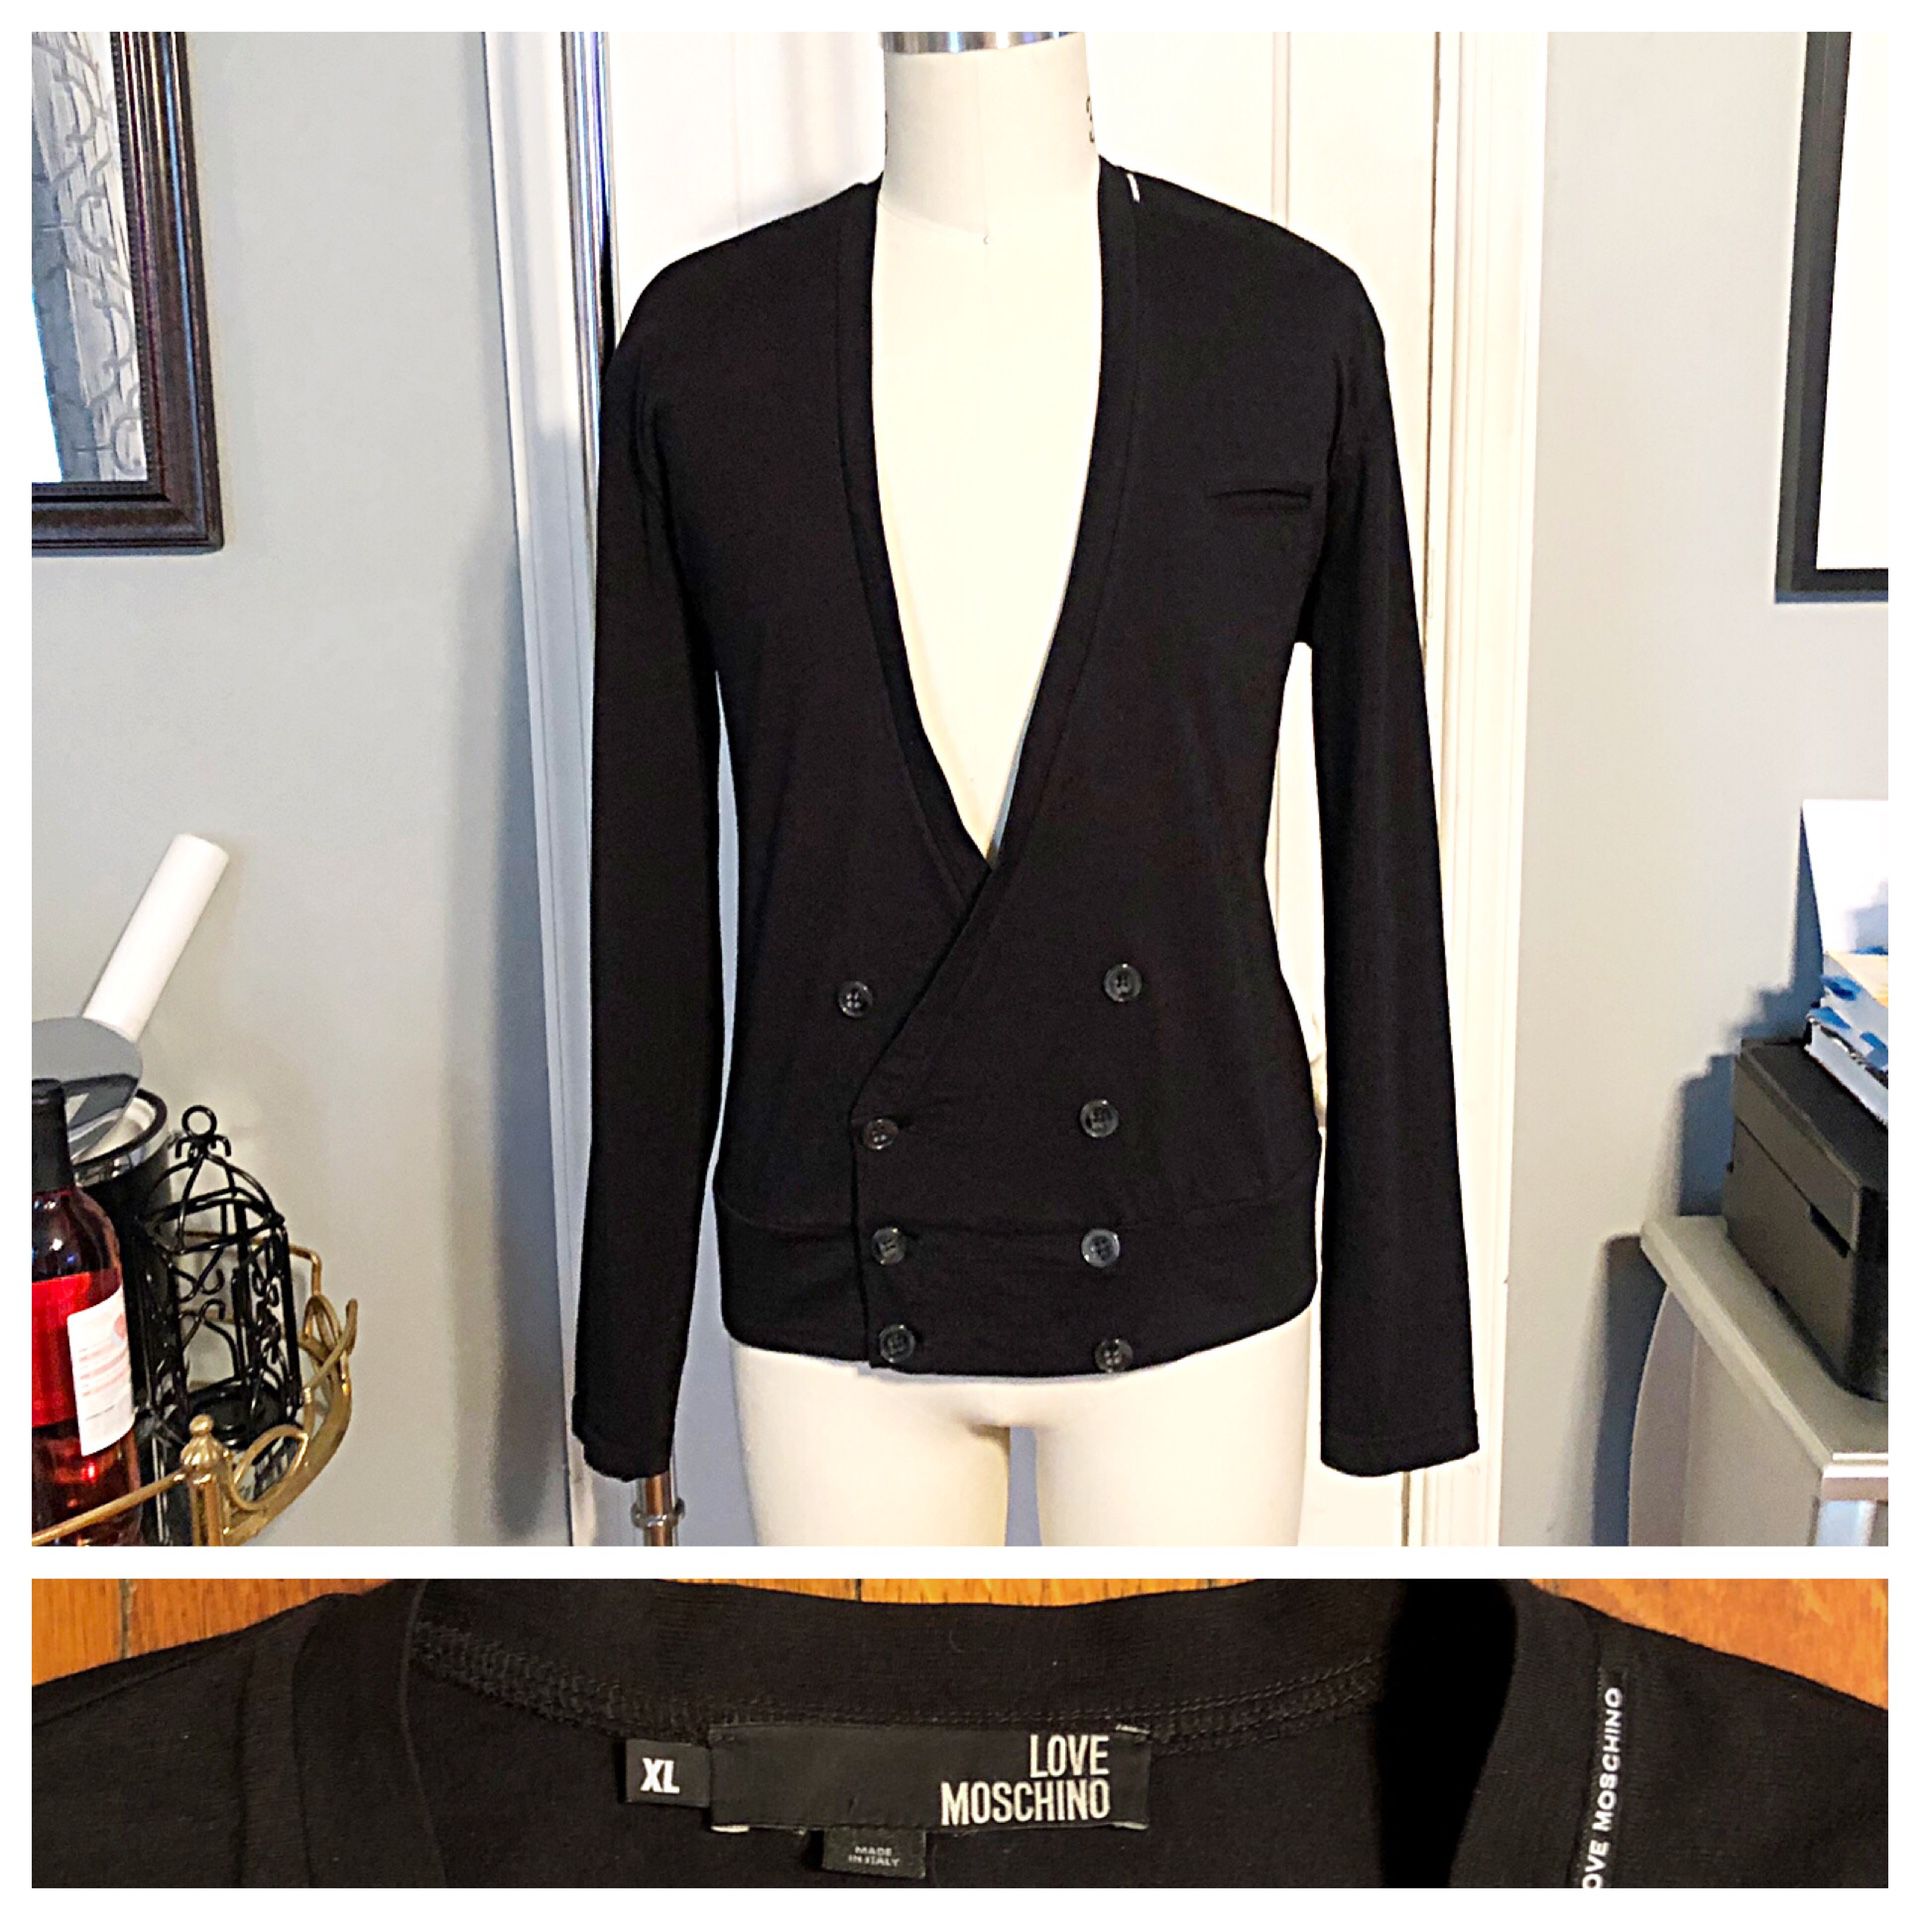 Mens Moschino cardigan paid $520 size XL excellent condition. 100% authentic made in Italy fabric as wool.